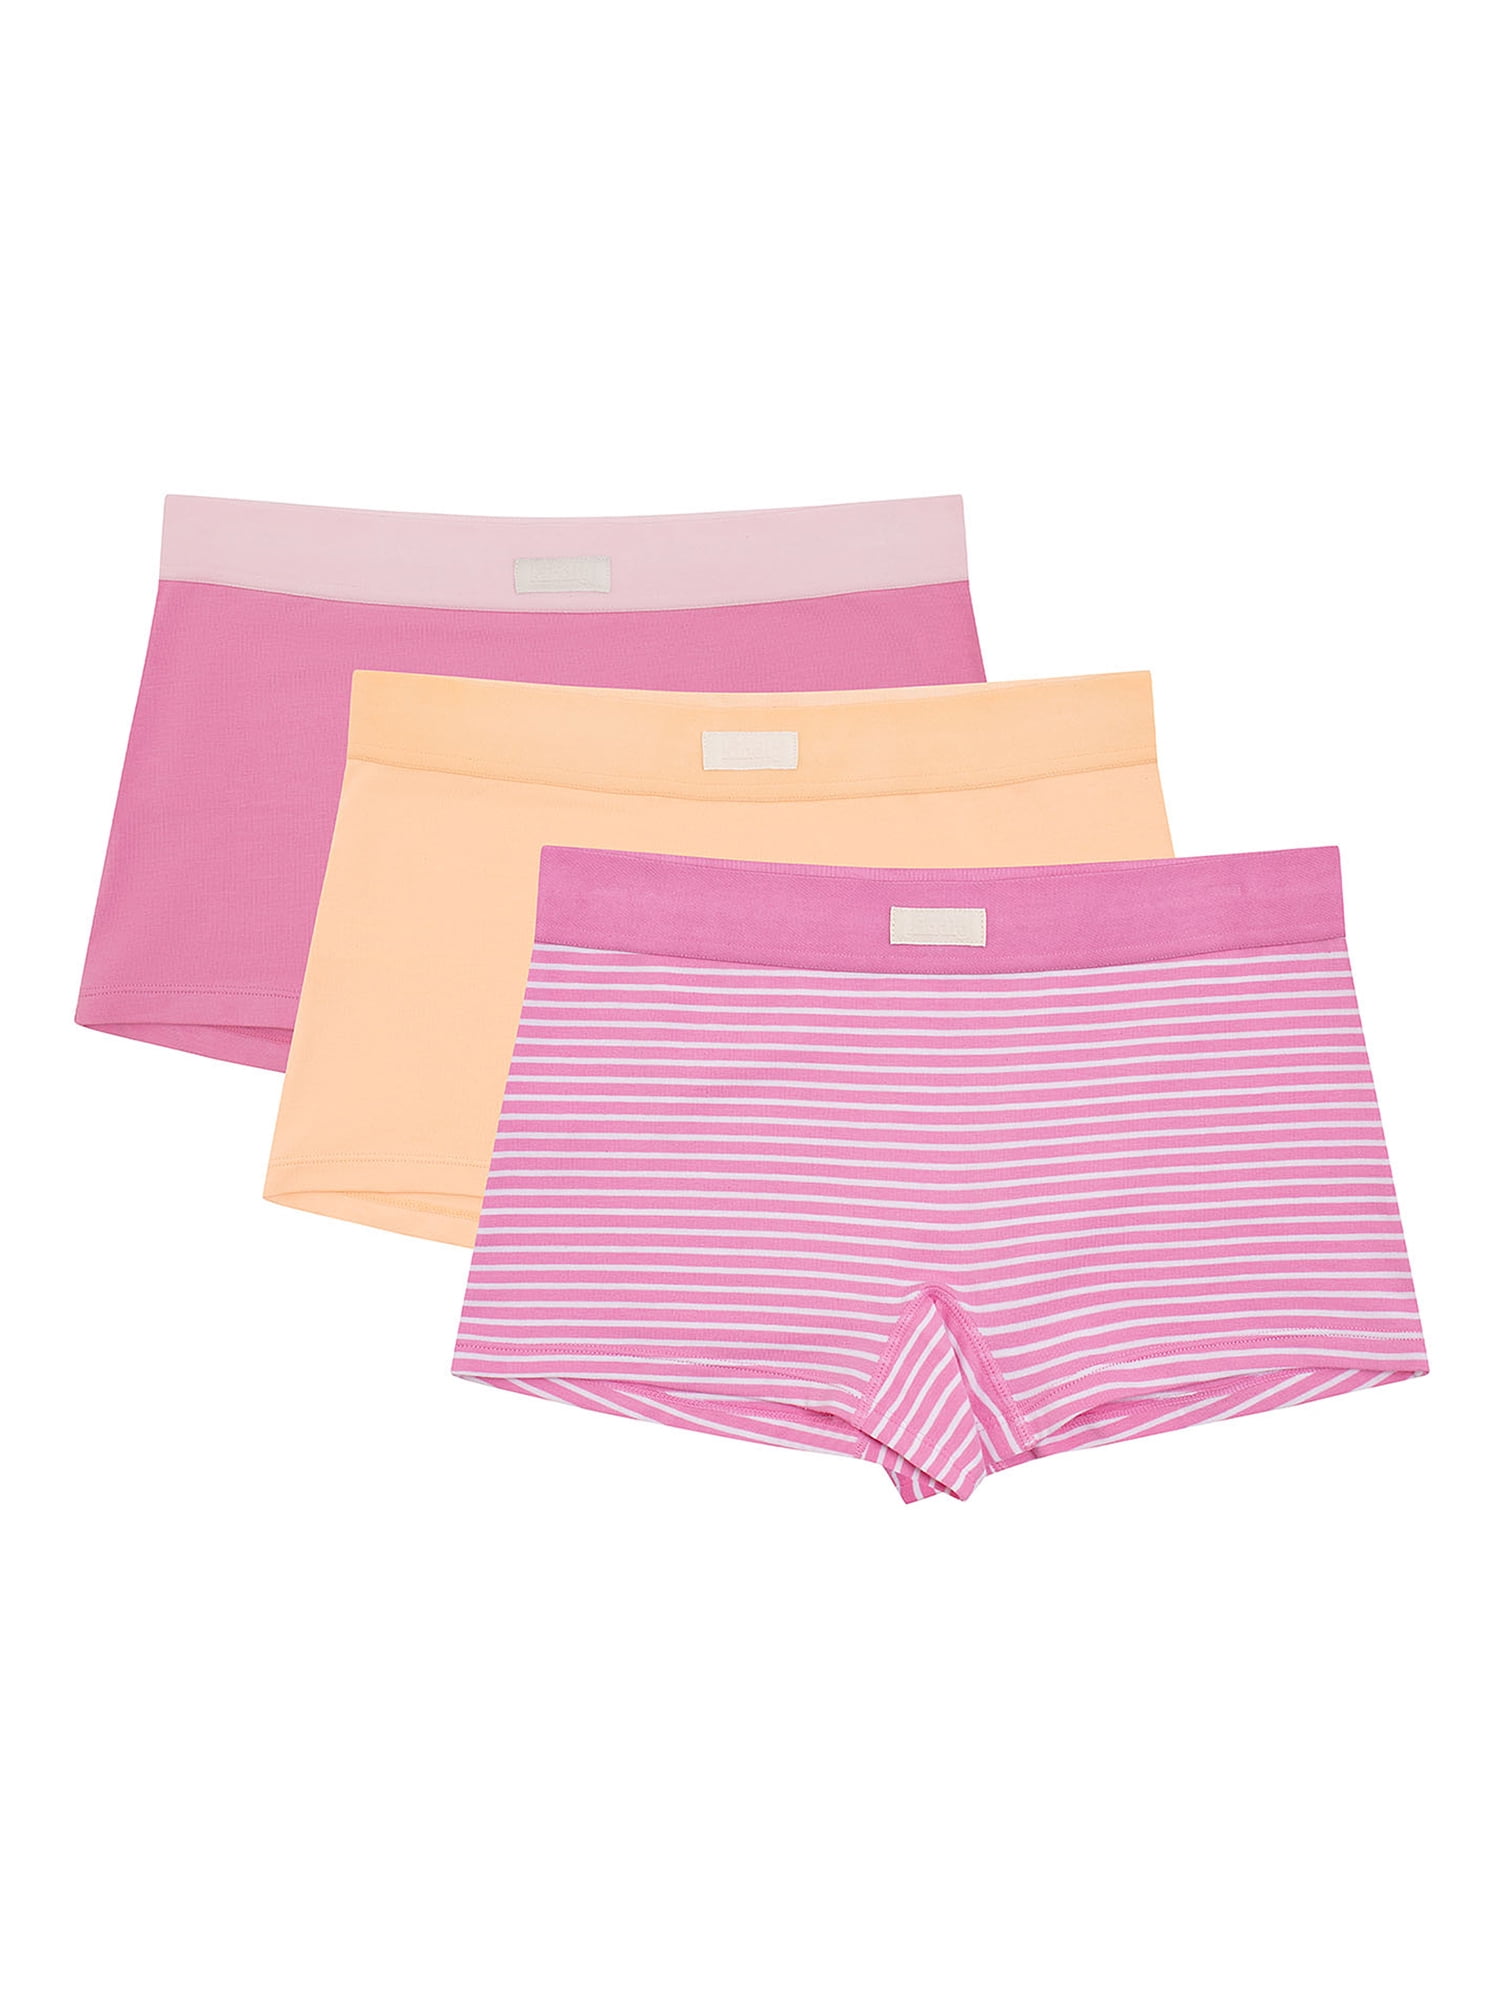 Kindly Yours Women's Sustainable Cotton Boyshort Underwear, 3-Pack 